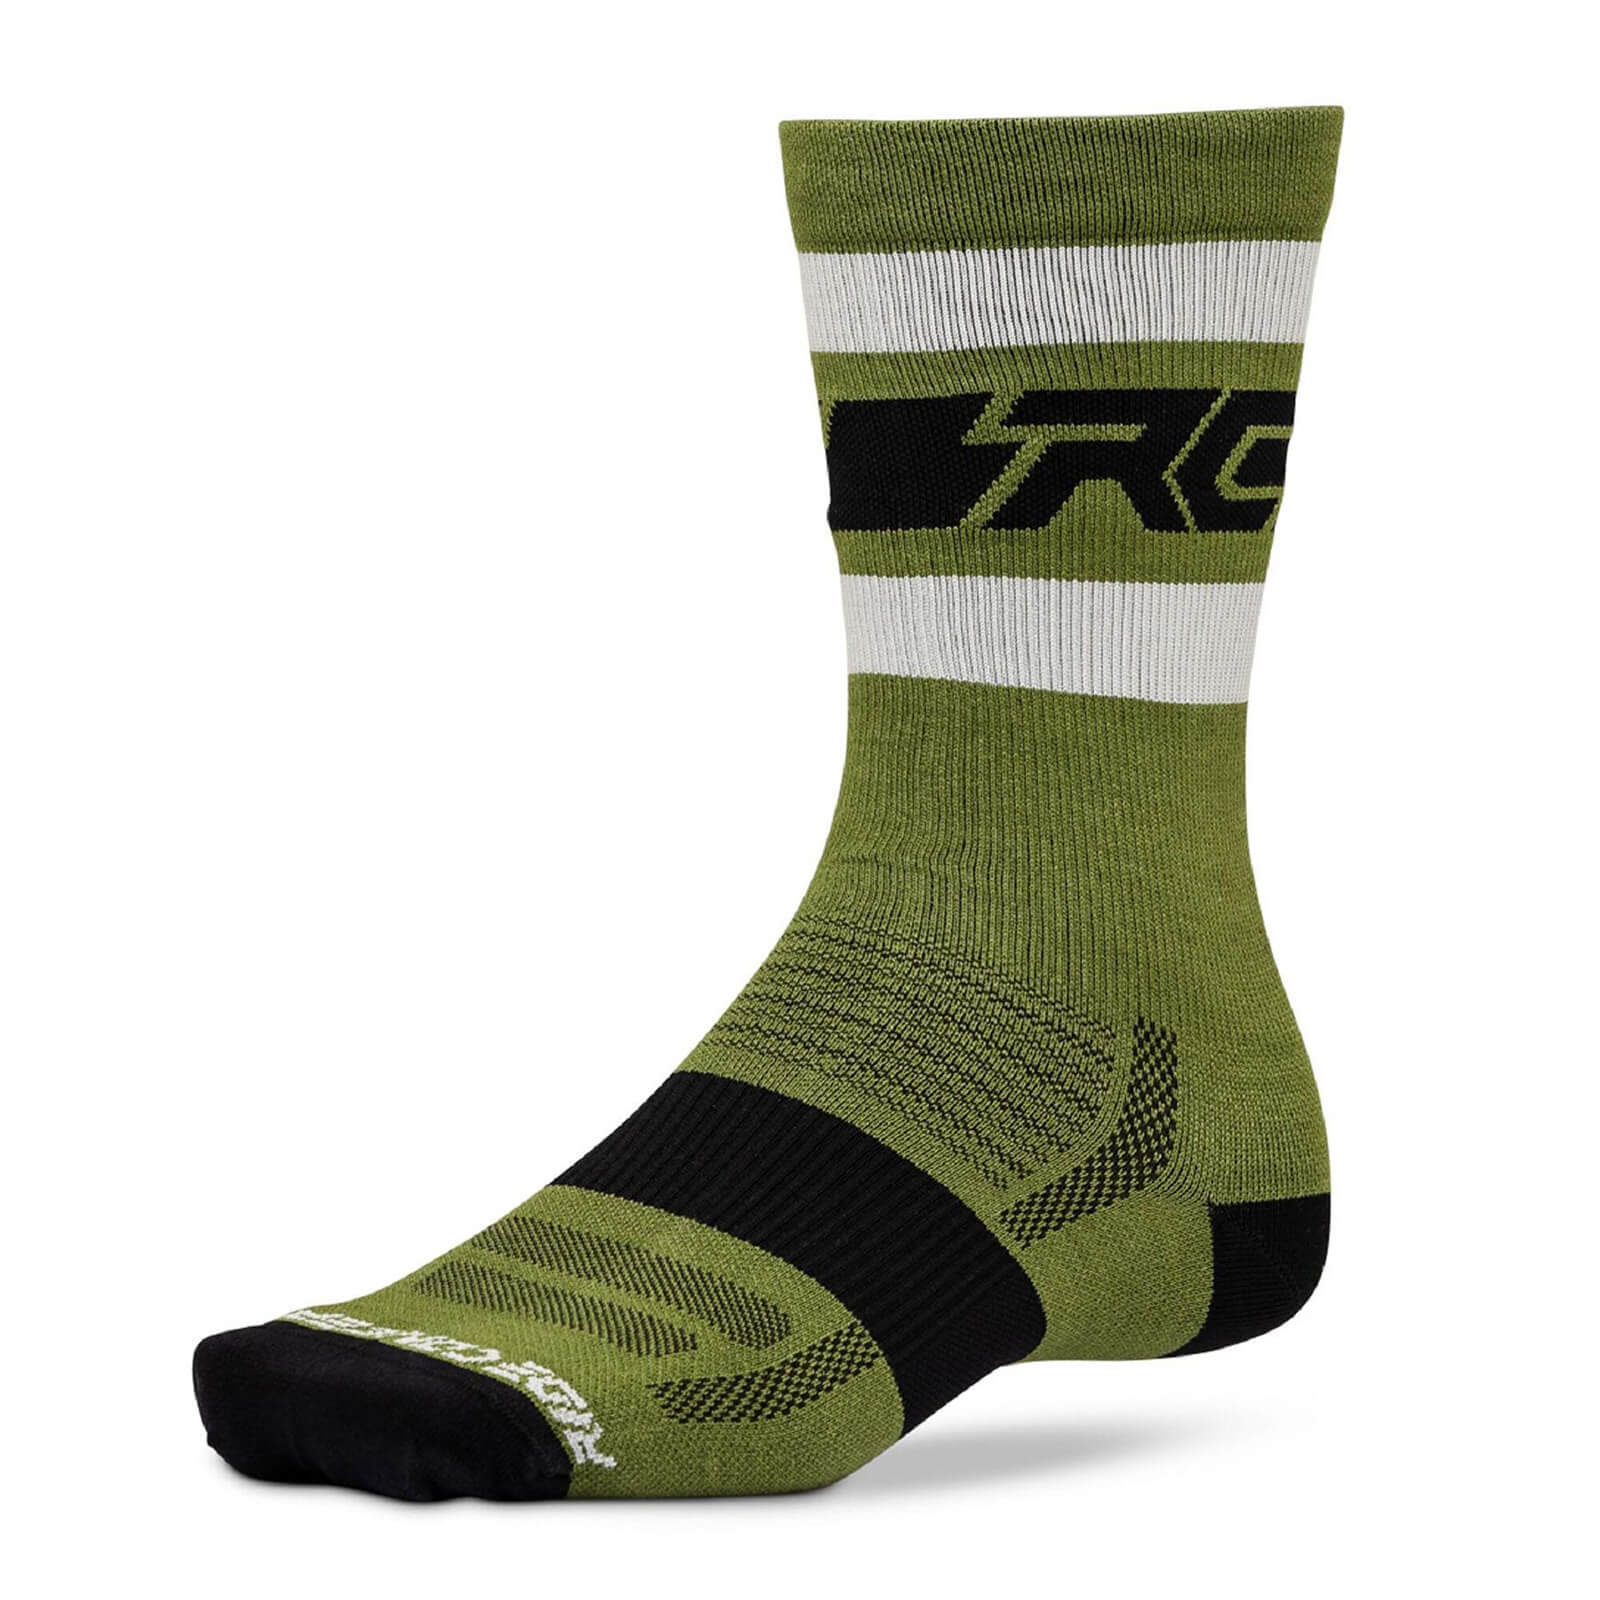 Ride Concepts Fifty/Fifty MTB Socks - L - Olive